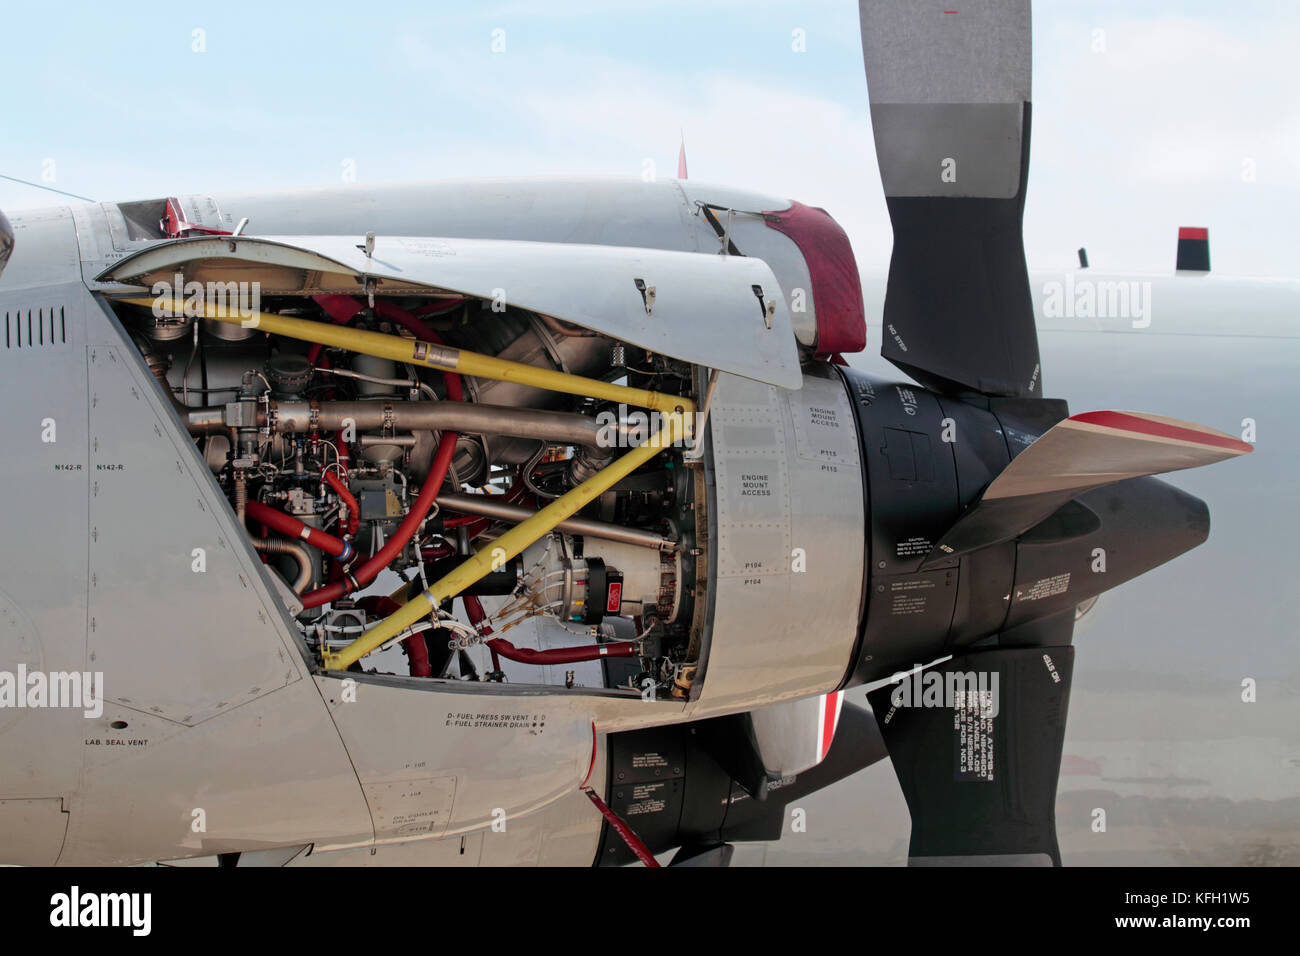 Close-up of an Allison T56 turboprop engine on a German Navy P-3C Orion maritime patrol aircraft with open inspection panel Stock Photo